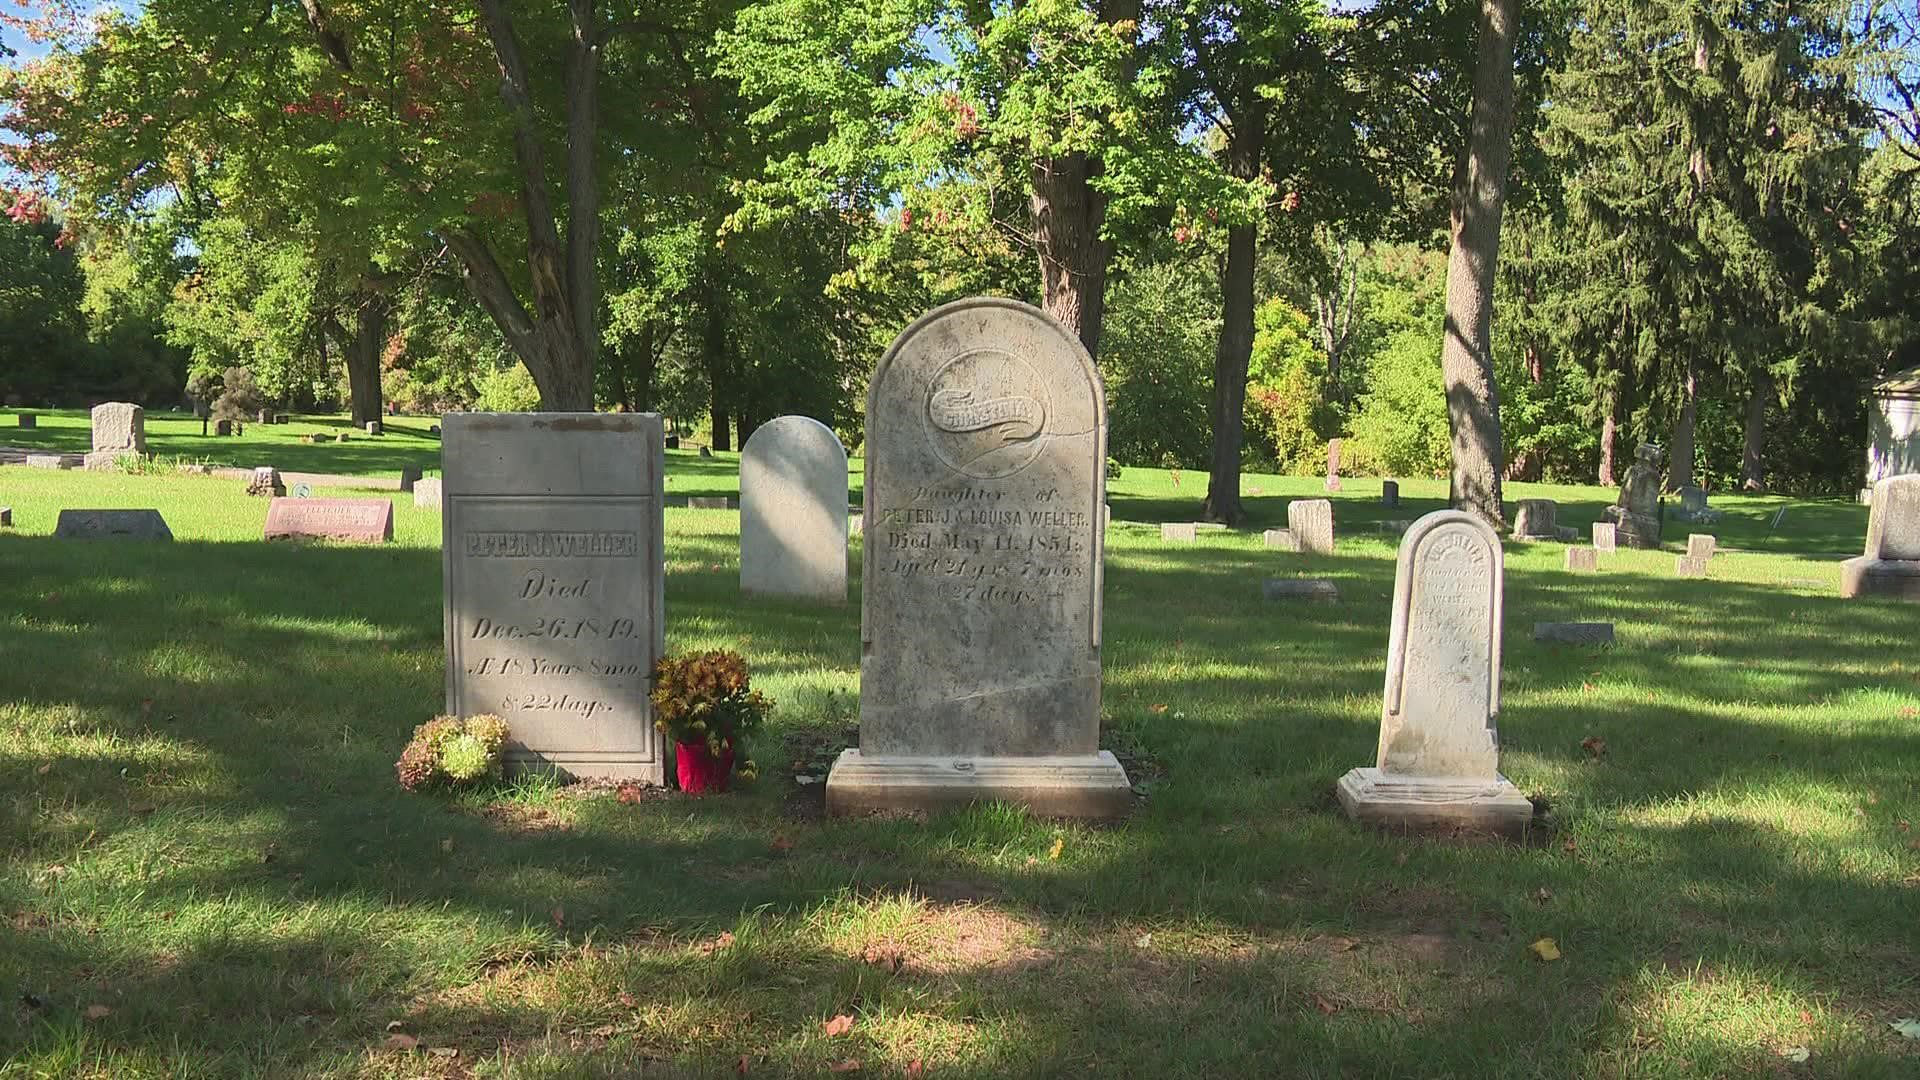 Peter Weller's gravestone mysteriously disappeared in transit to a Lansing cemetery in 1875. It reappeared 146 years later with fudge stains on the back.